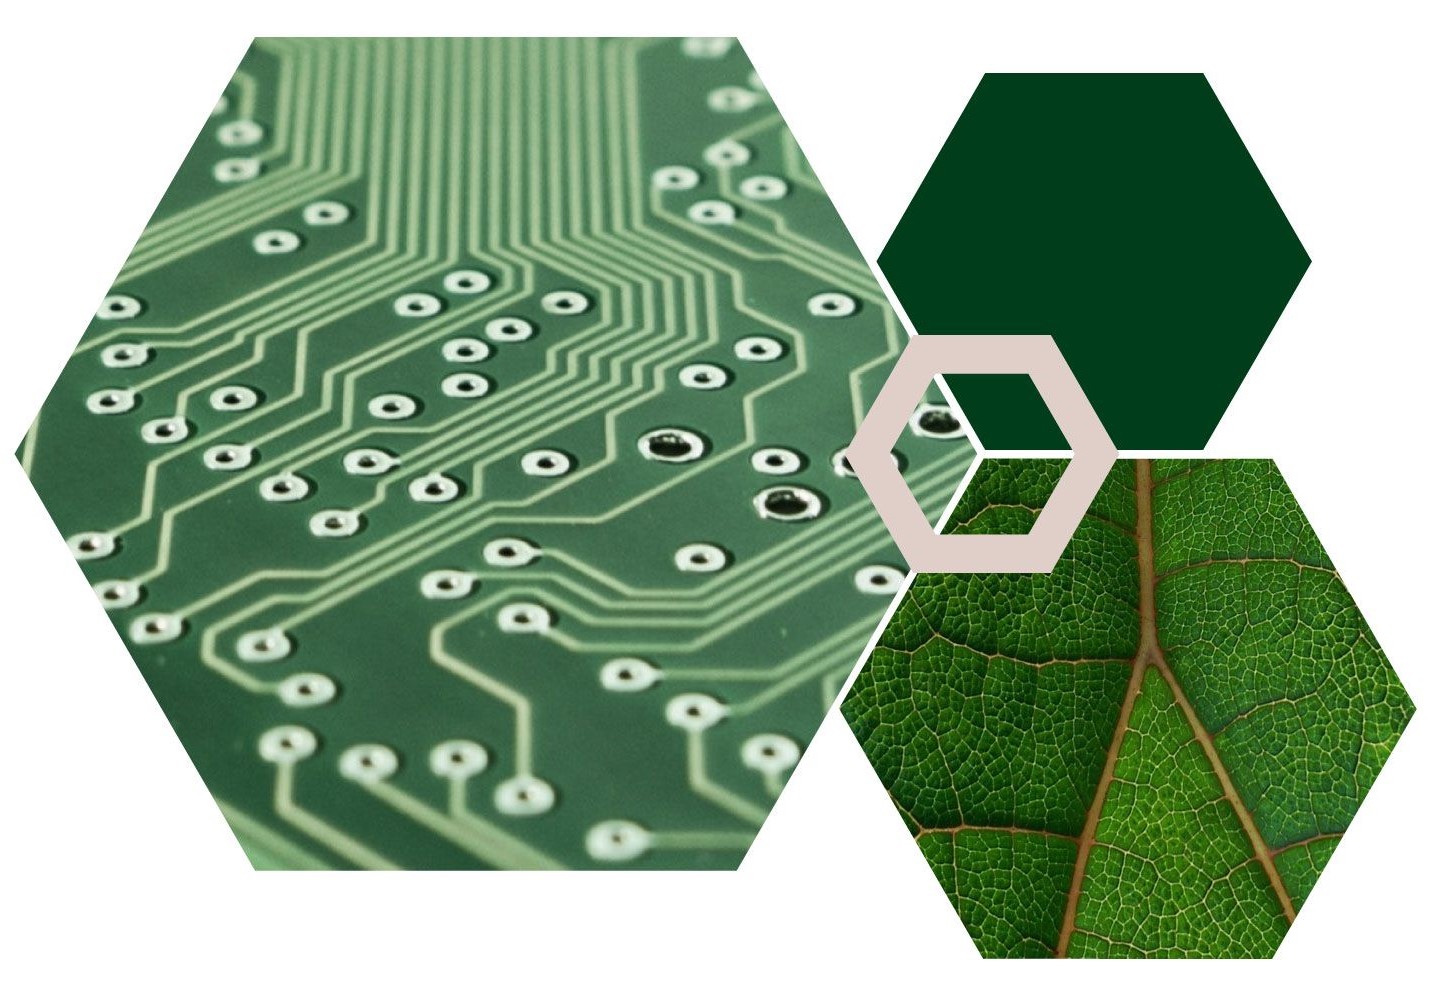 Hexagon collage with images of a microchip and a close up of a leaf